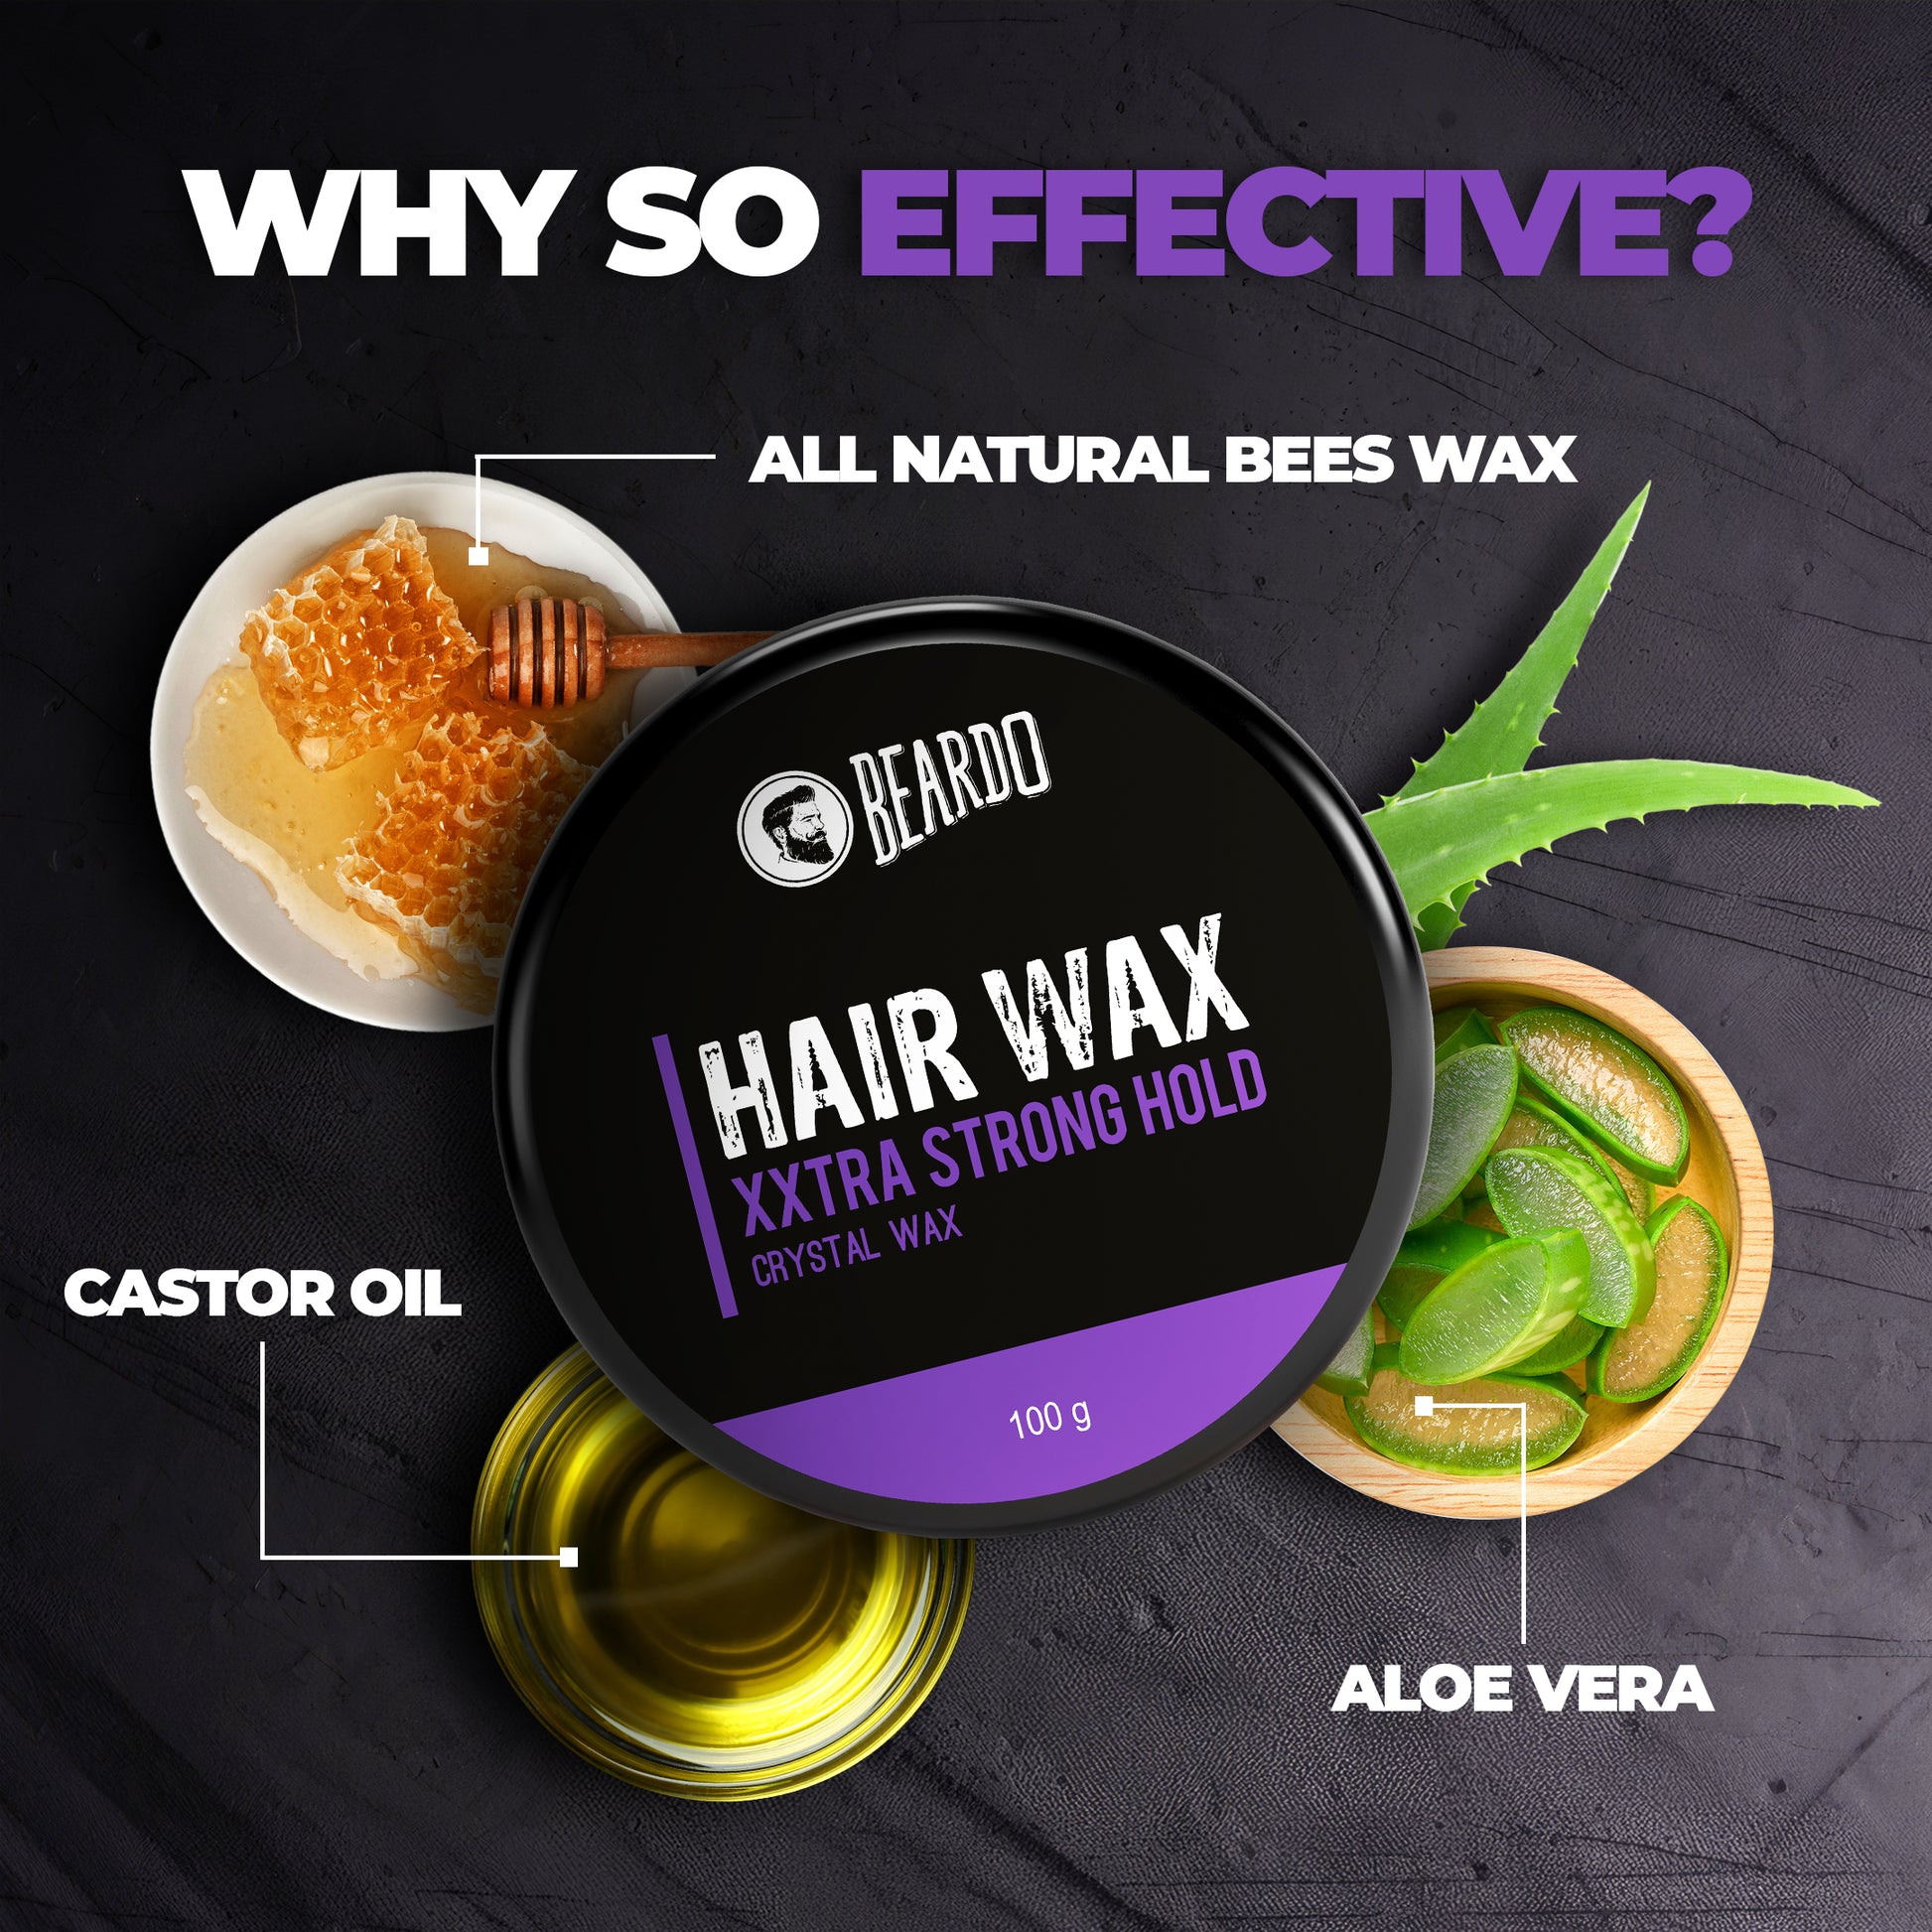 Which hair wax has the strongest hold? Which company hair wax is best?